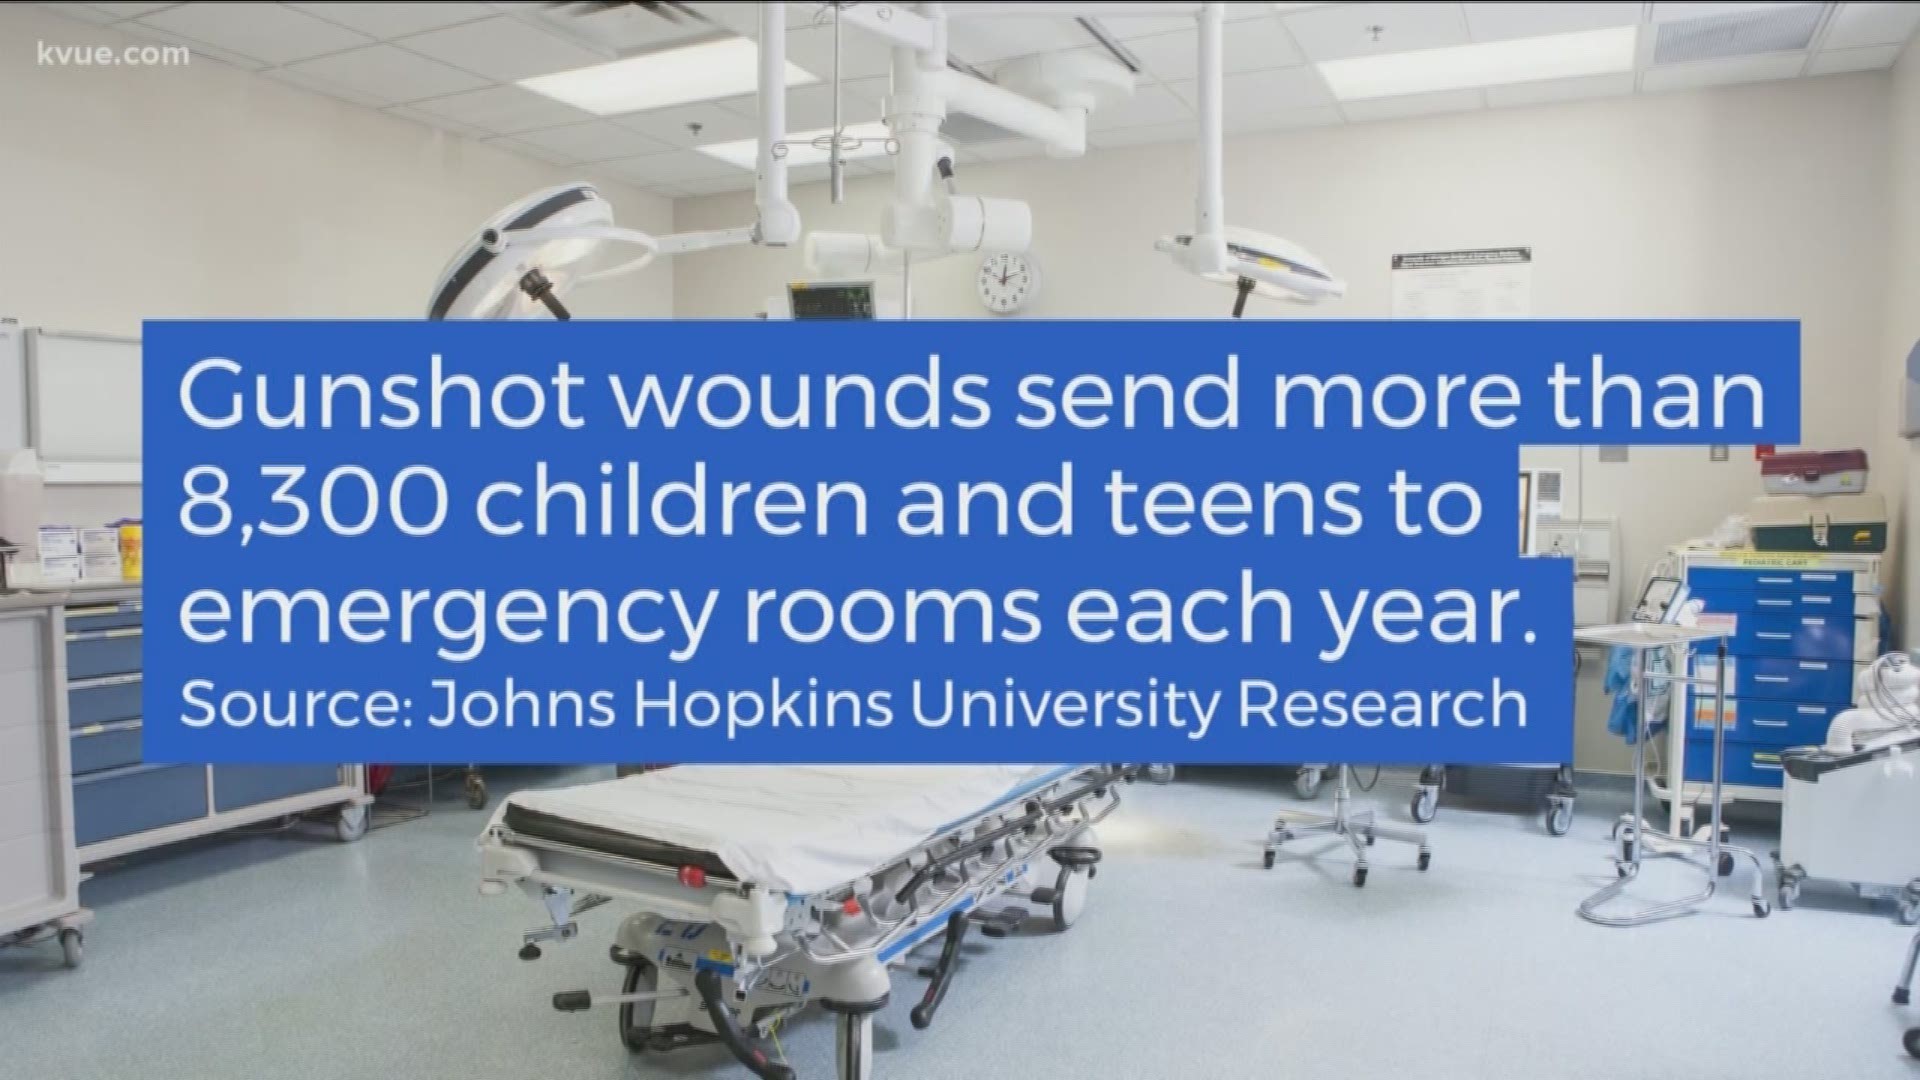 Gunshot wounds send more than 8,300 children and teens to emergency rooms each year, according to research by Johns Hopkins University.